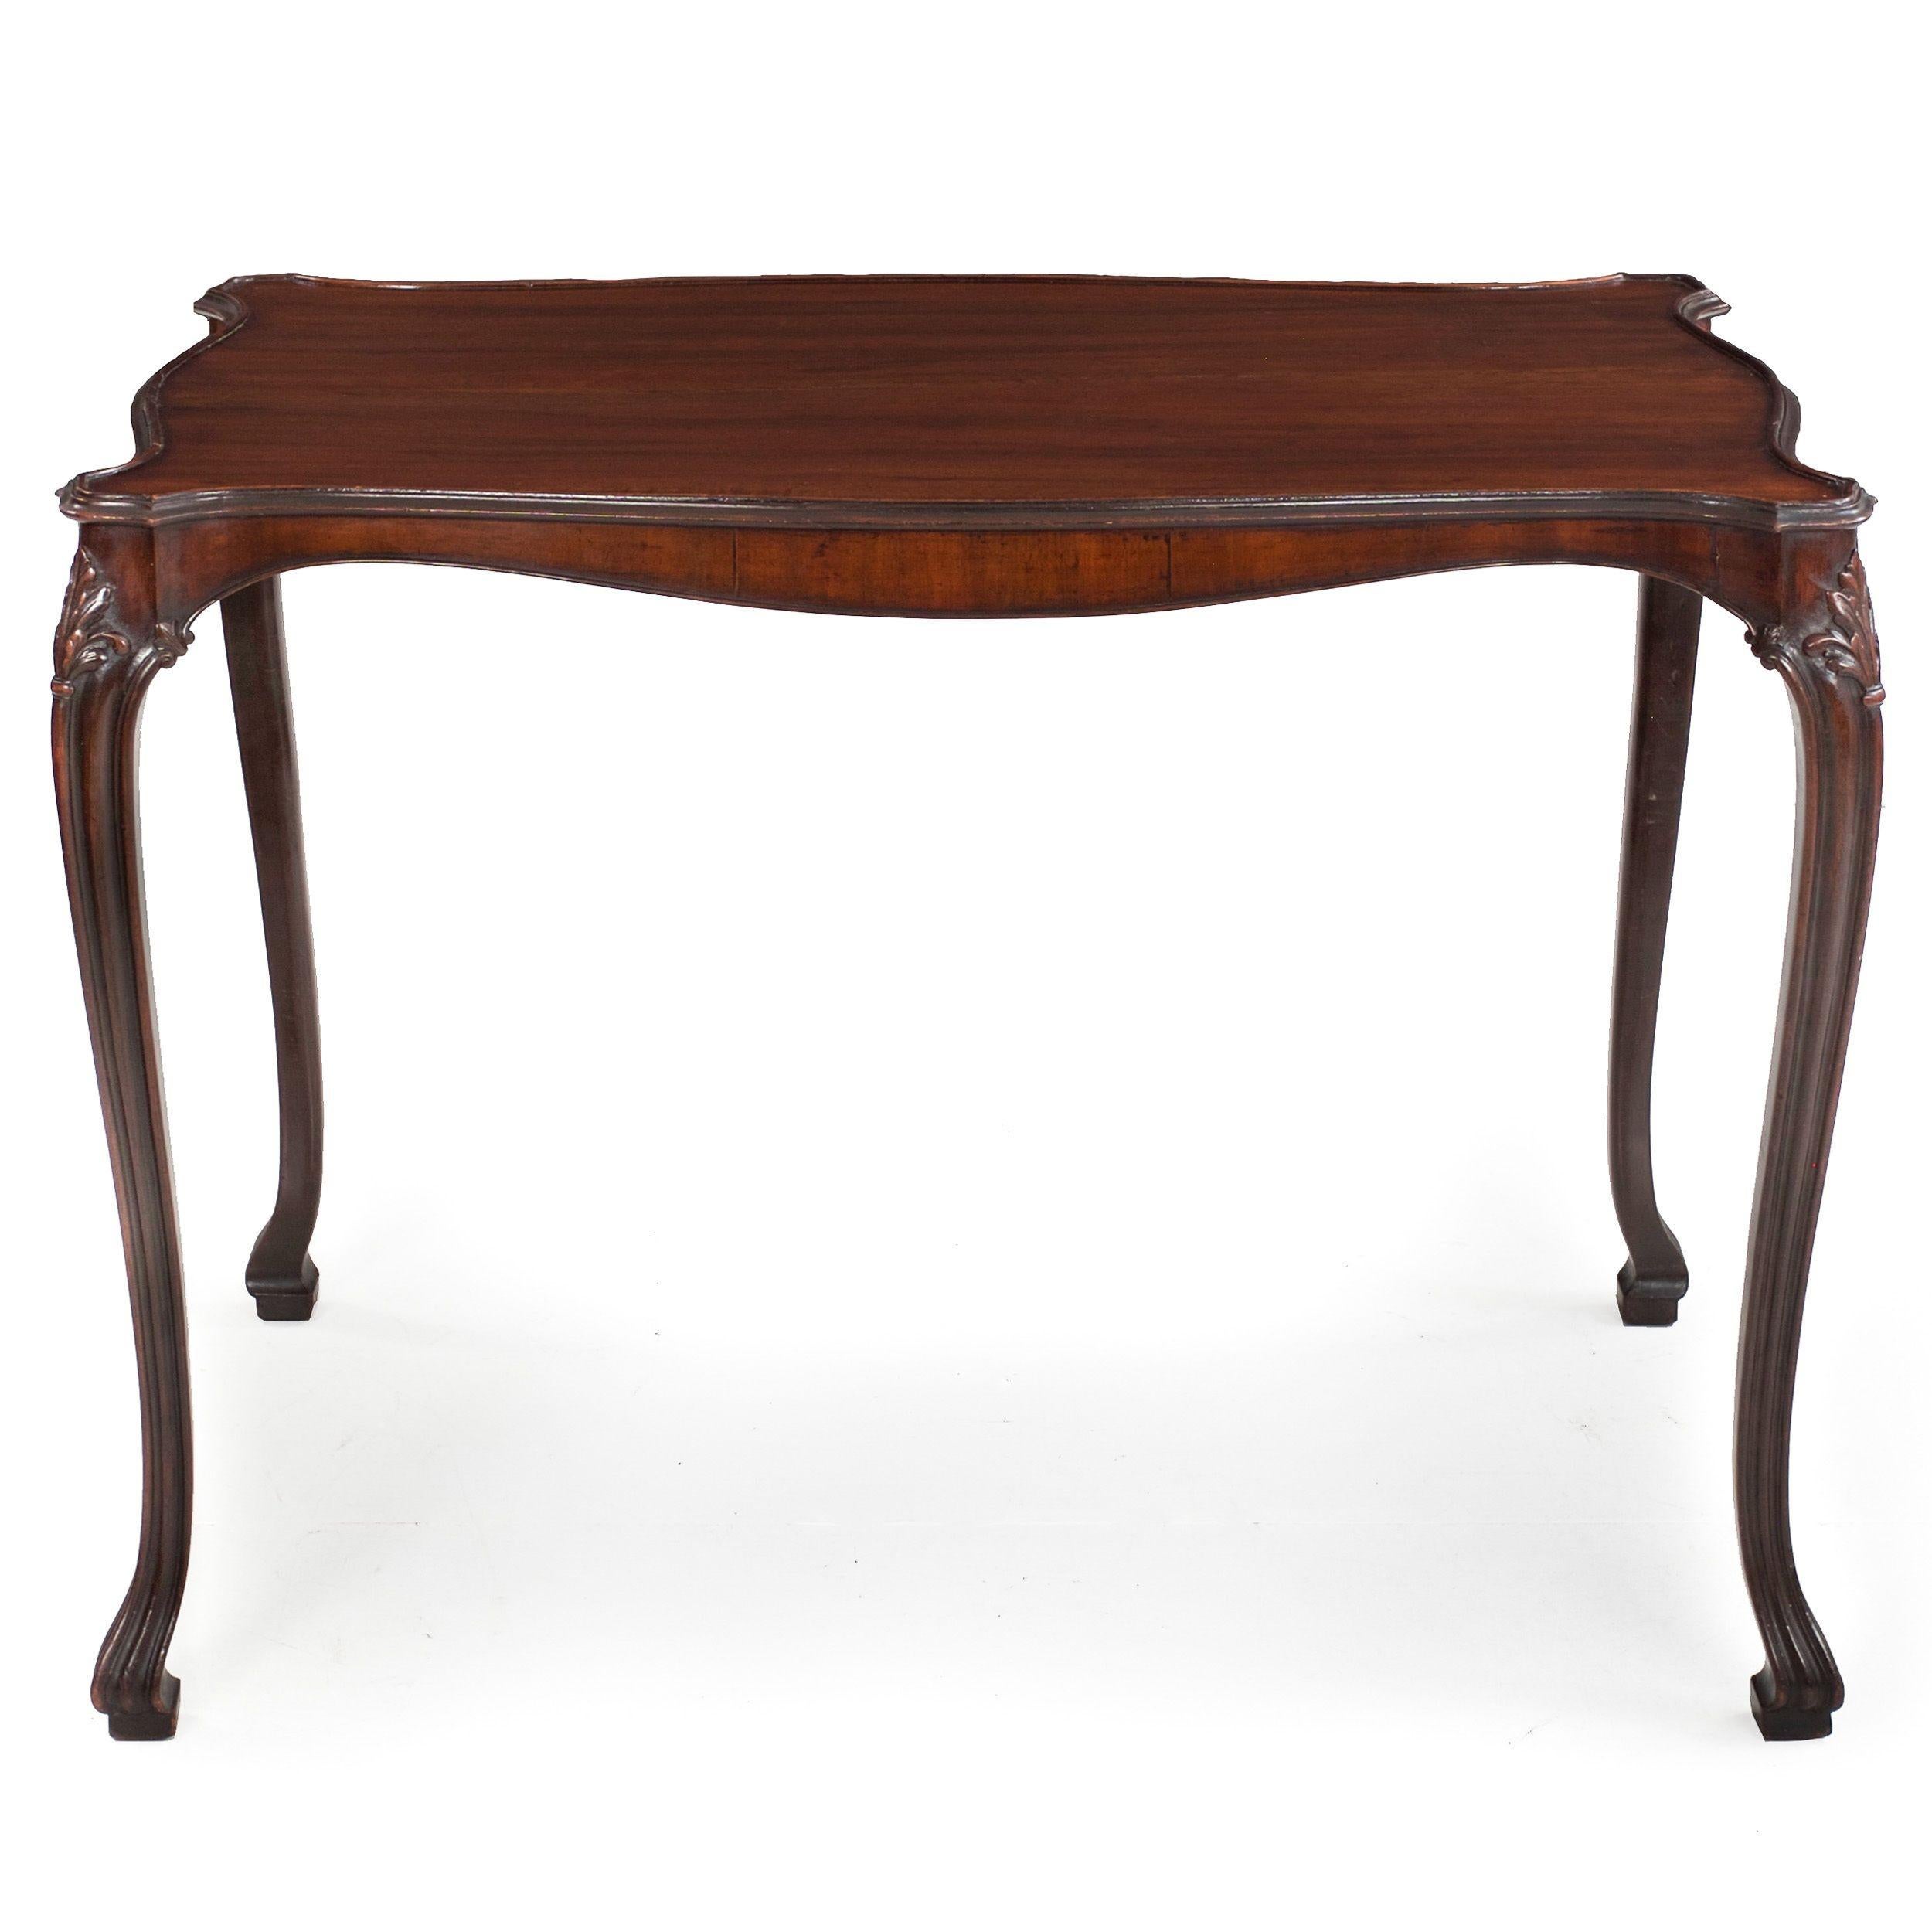 Rare English Chippendale Mahogany Serpentine Serving Table, circa 1770
C104055-1

An exquisite Chippendale center table, it was carefully designed with an eye for endlessly moving lines. The light profile allows for it this service piece to be moved